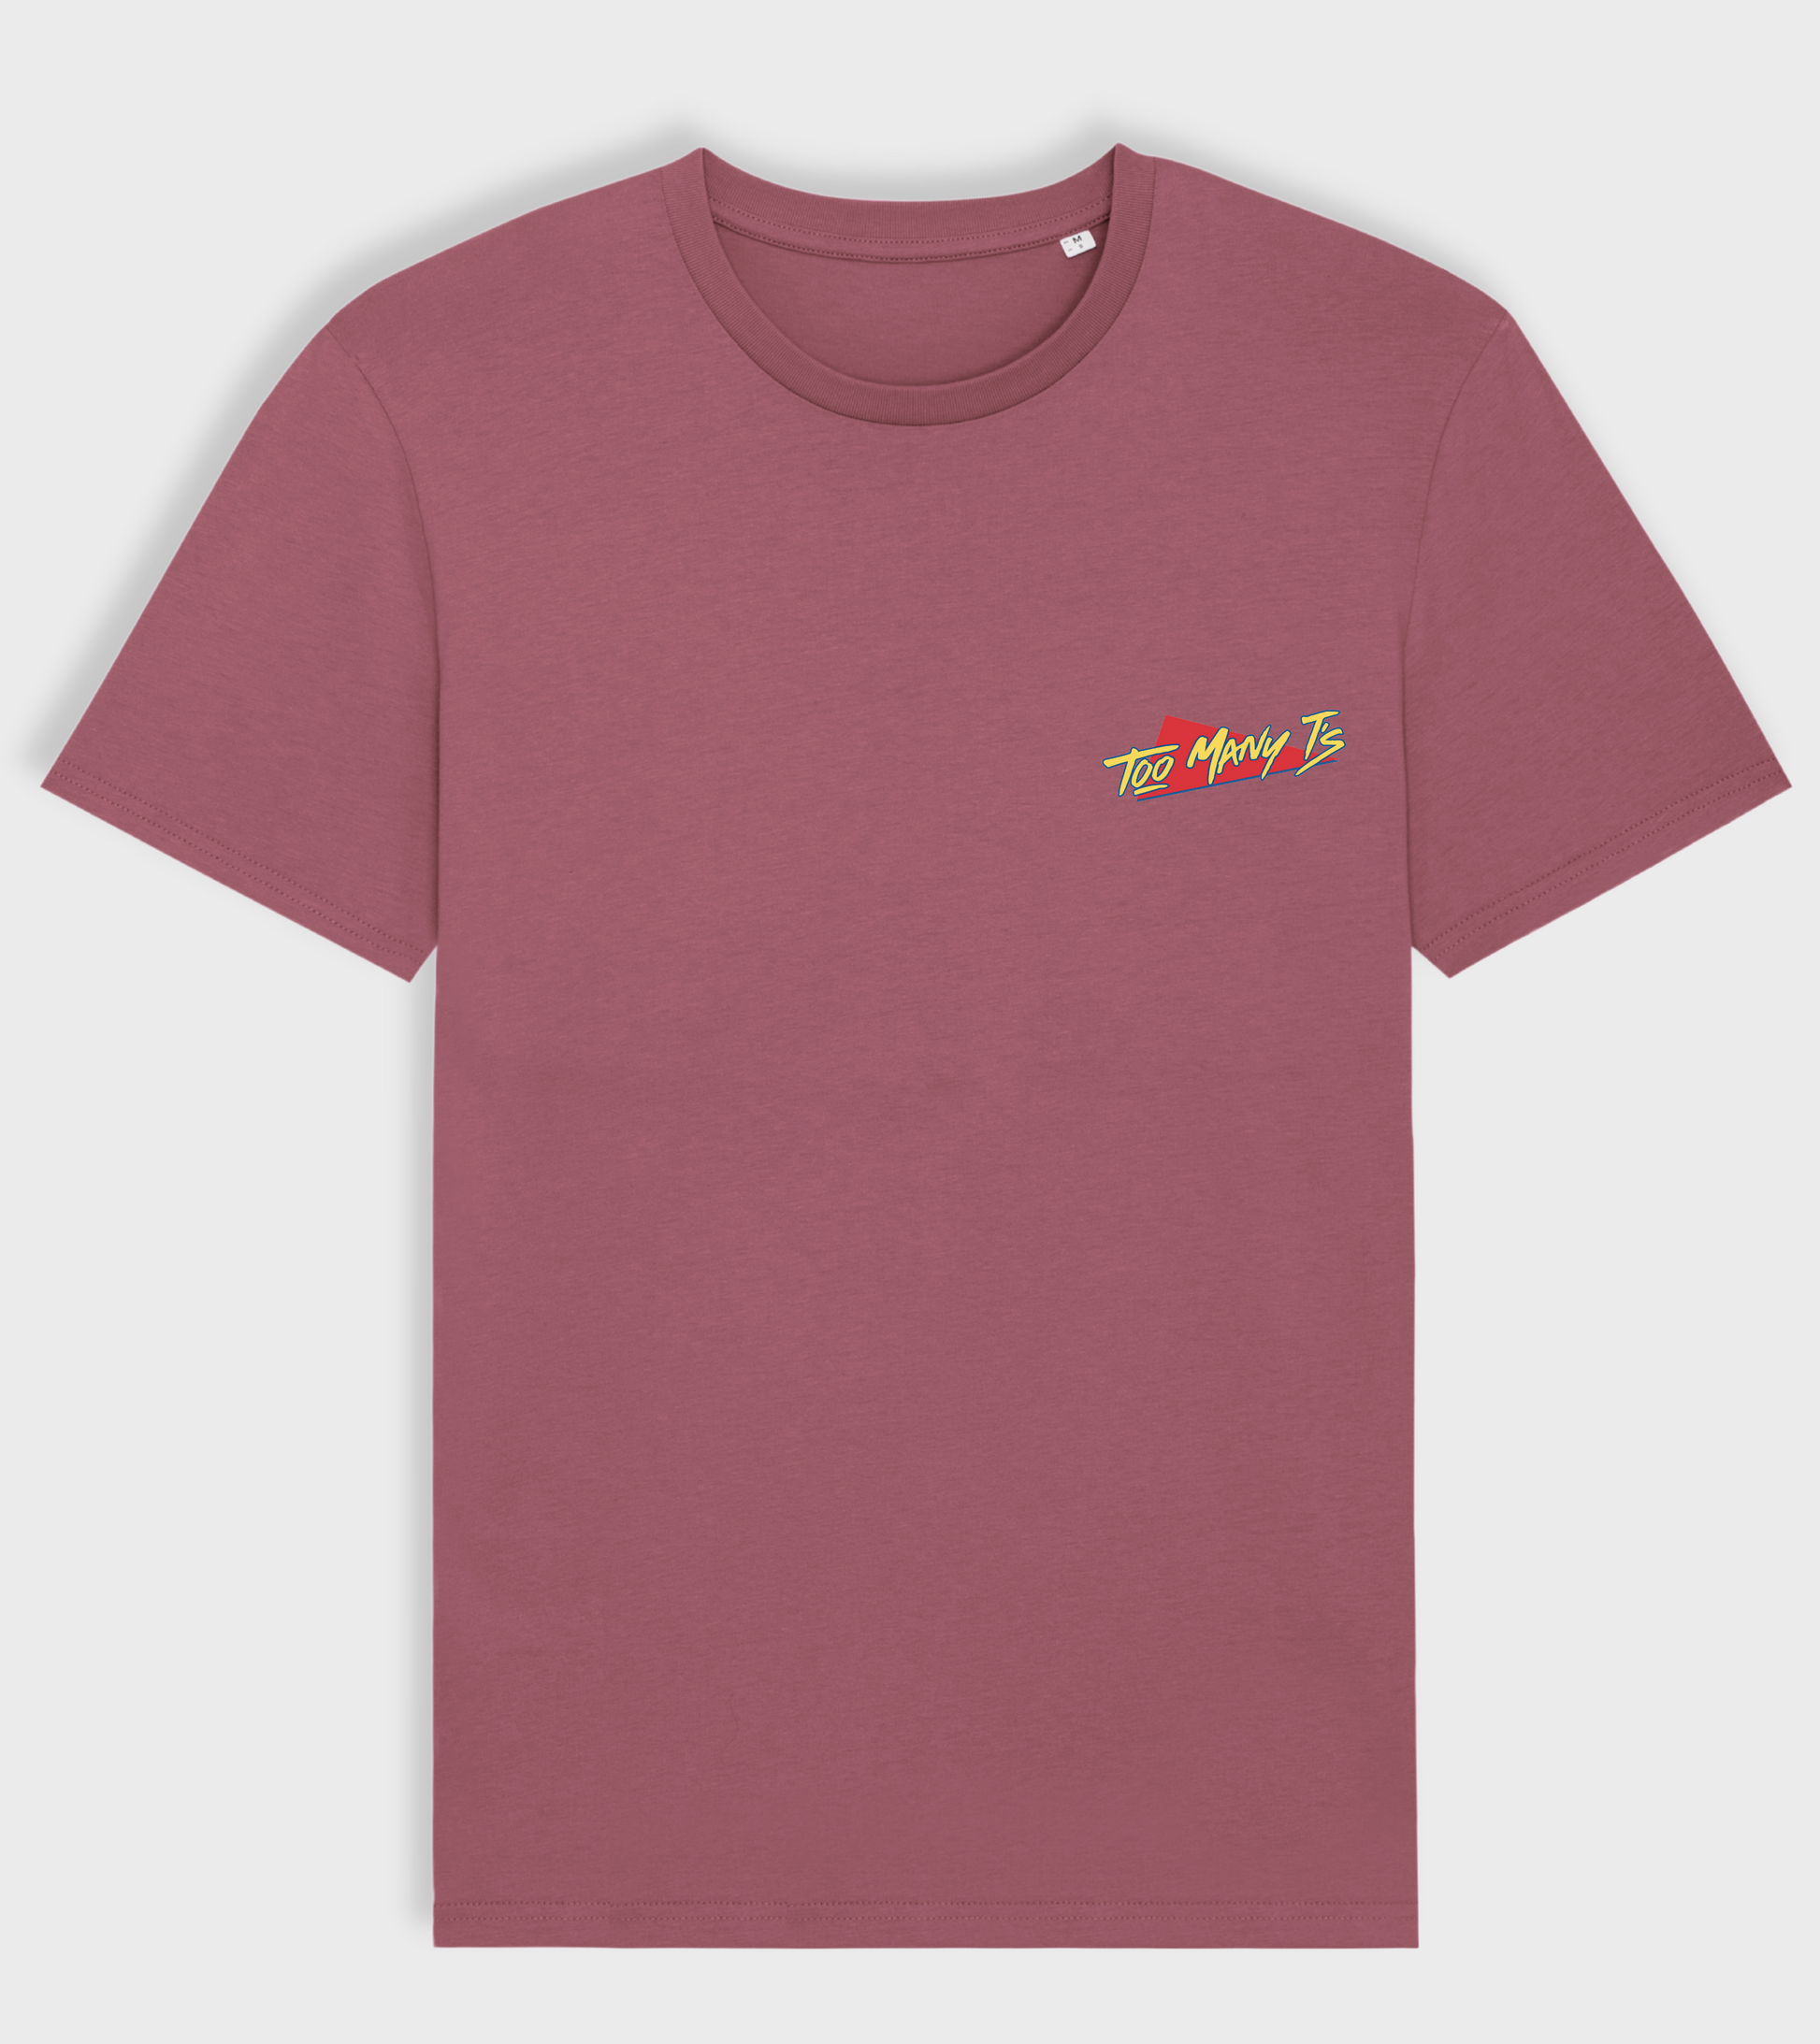 Red organic t-shirt with TOO MANY T'S original design.